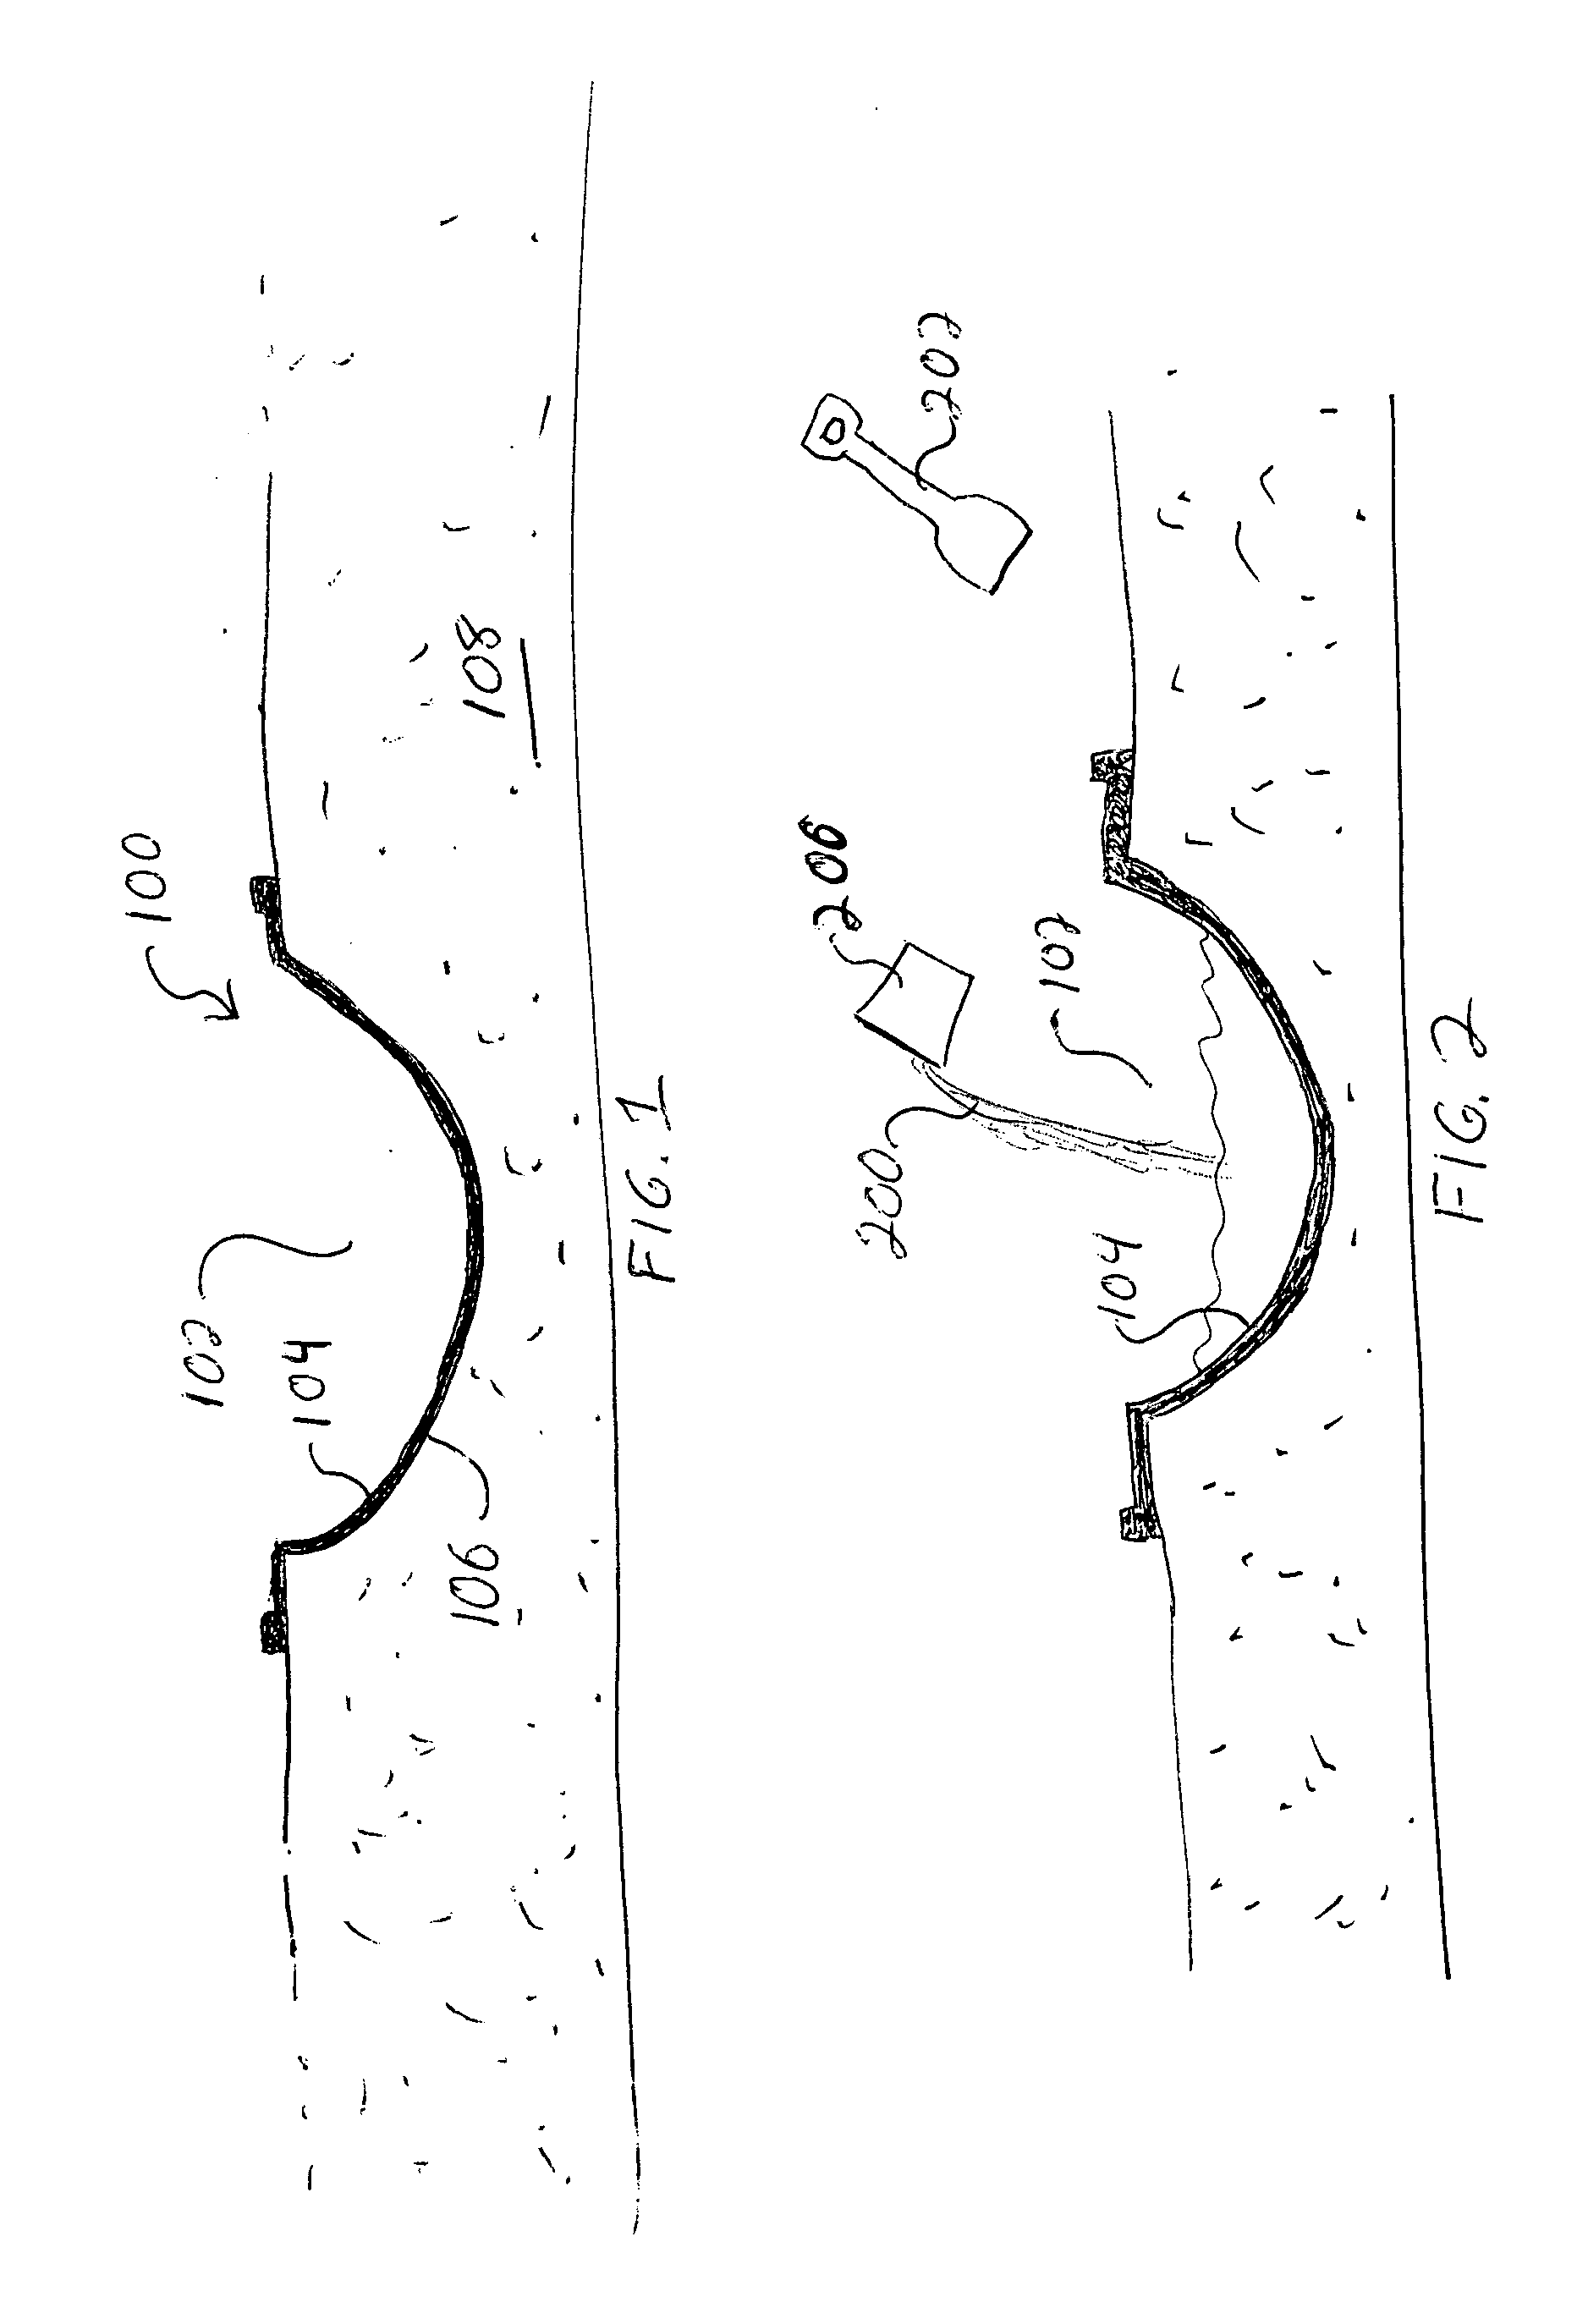 Method and apparatus for making a pool